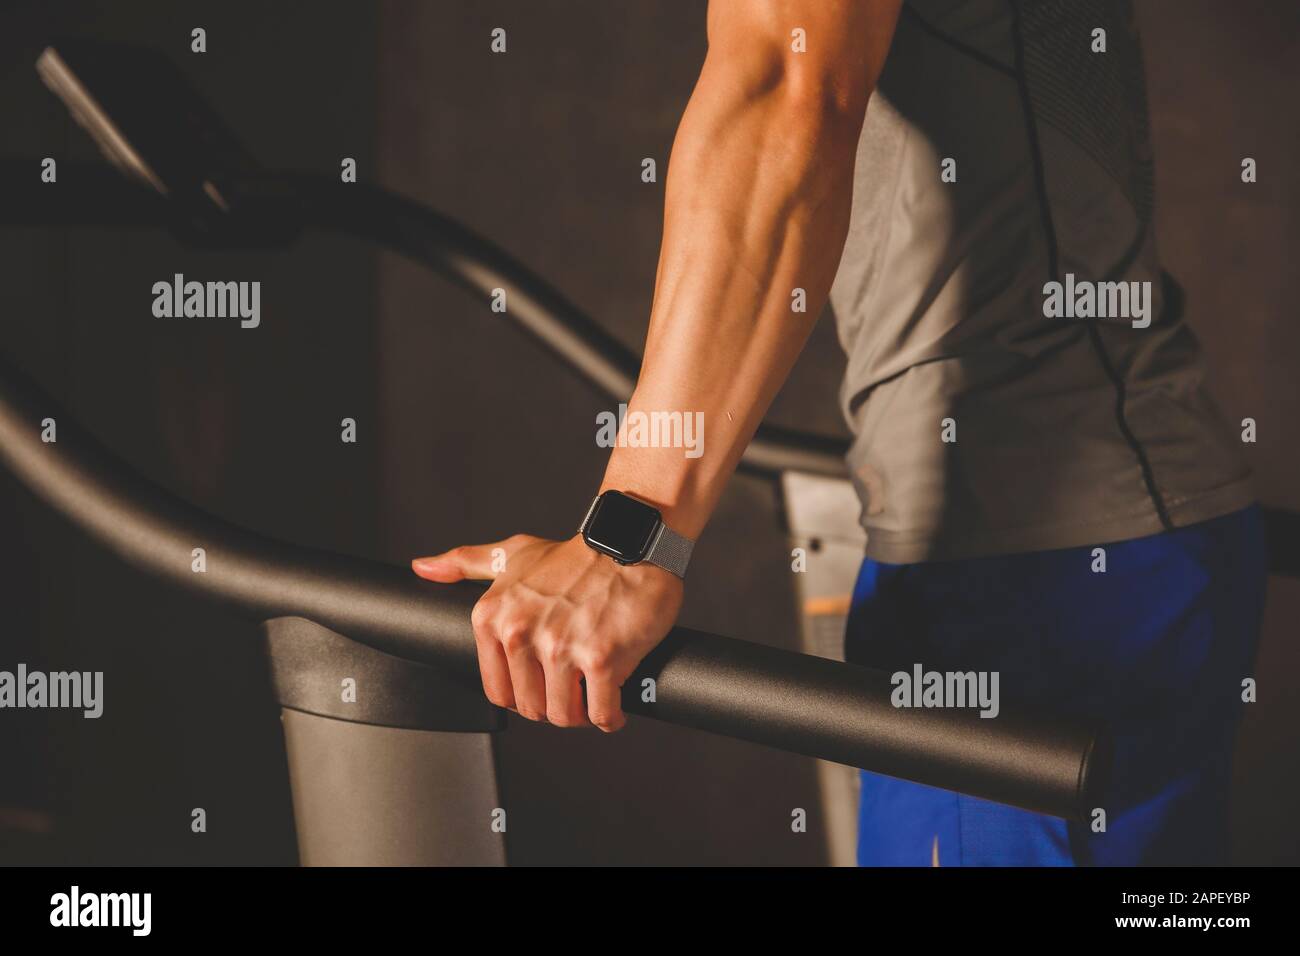 Male and female exercising in gym. Sport, fitness, weightlifting and training concept 406 Stock Photo